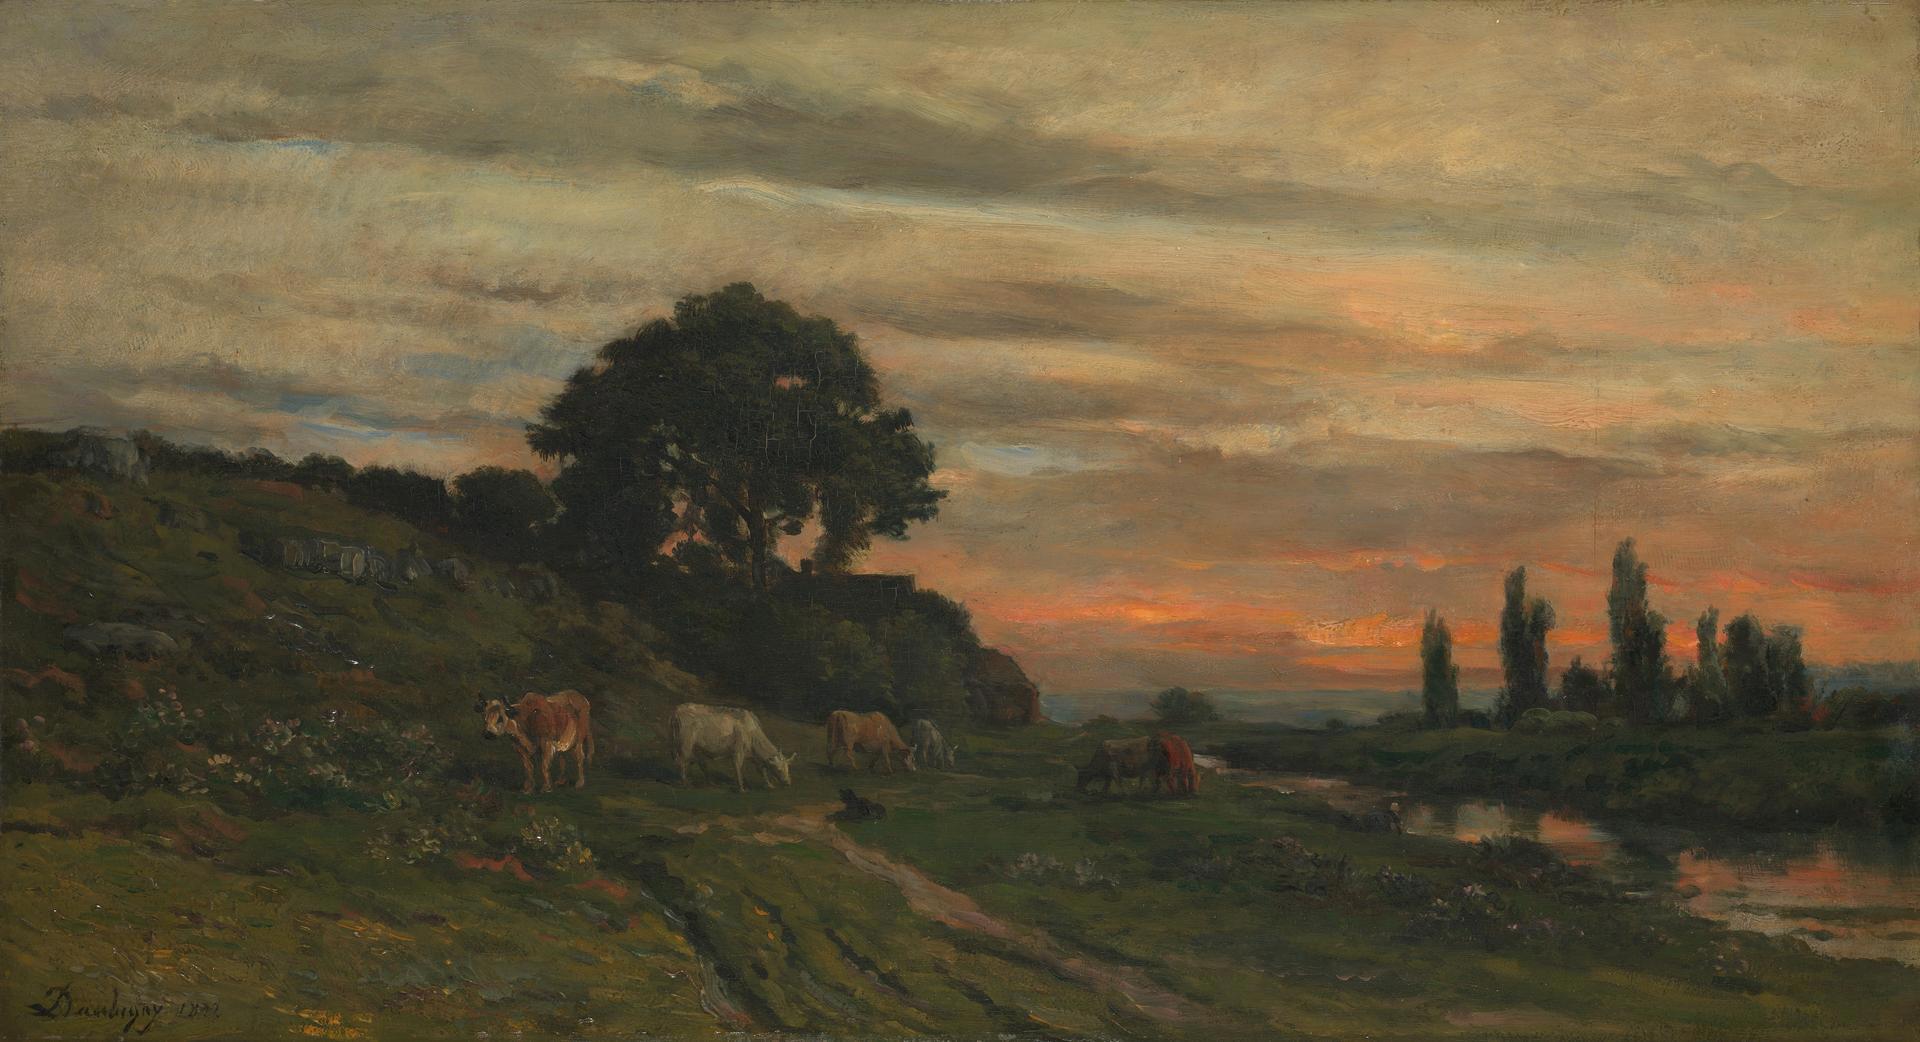 Landscape with Cattle by a Stream by Charles-François Daubigny